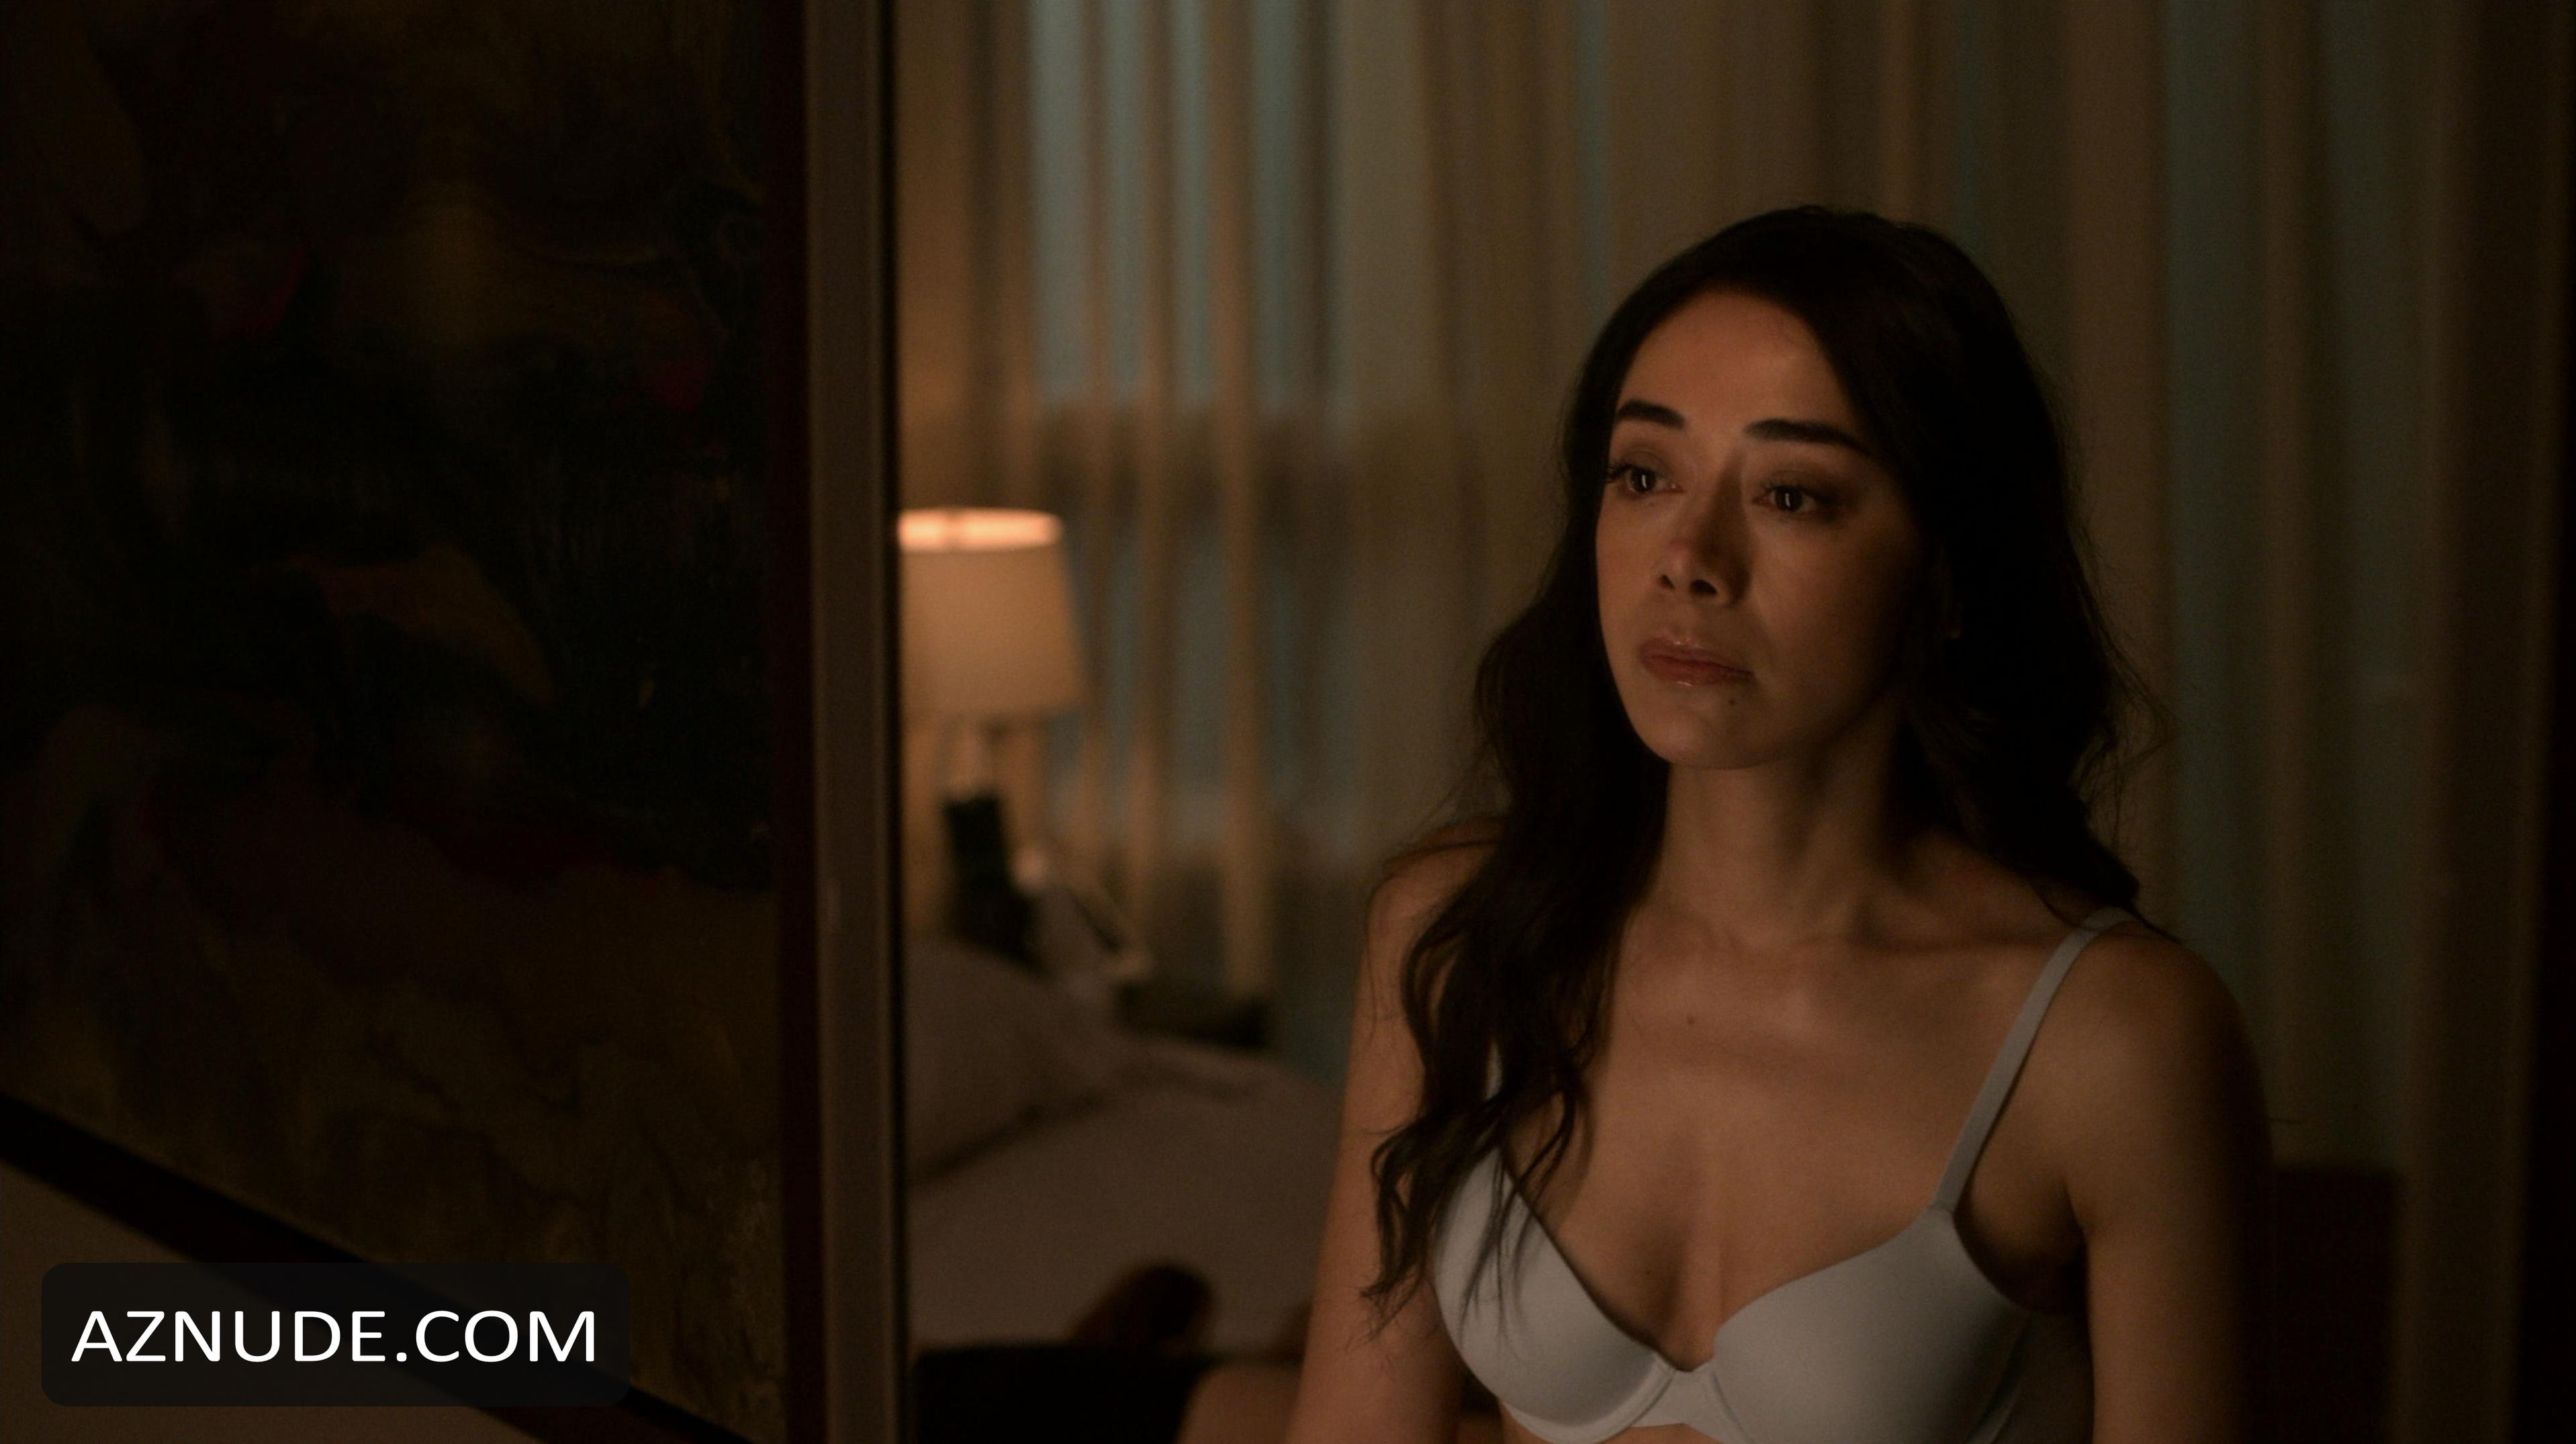 charlie dudley recommends Aimee Garcia Nsfw